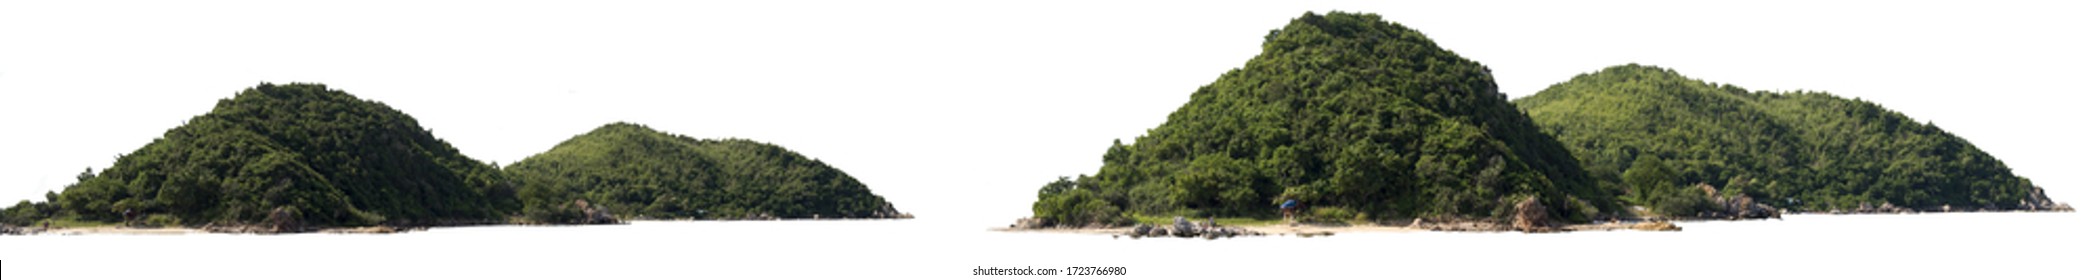 Panorama island, hill, mountain isolated on a white background, with clipping path. Mountain peak. - Shutterstock ID 1723766980